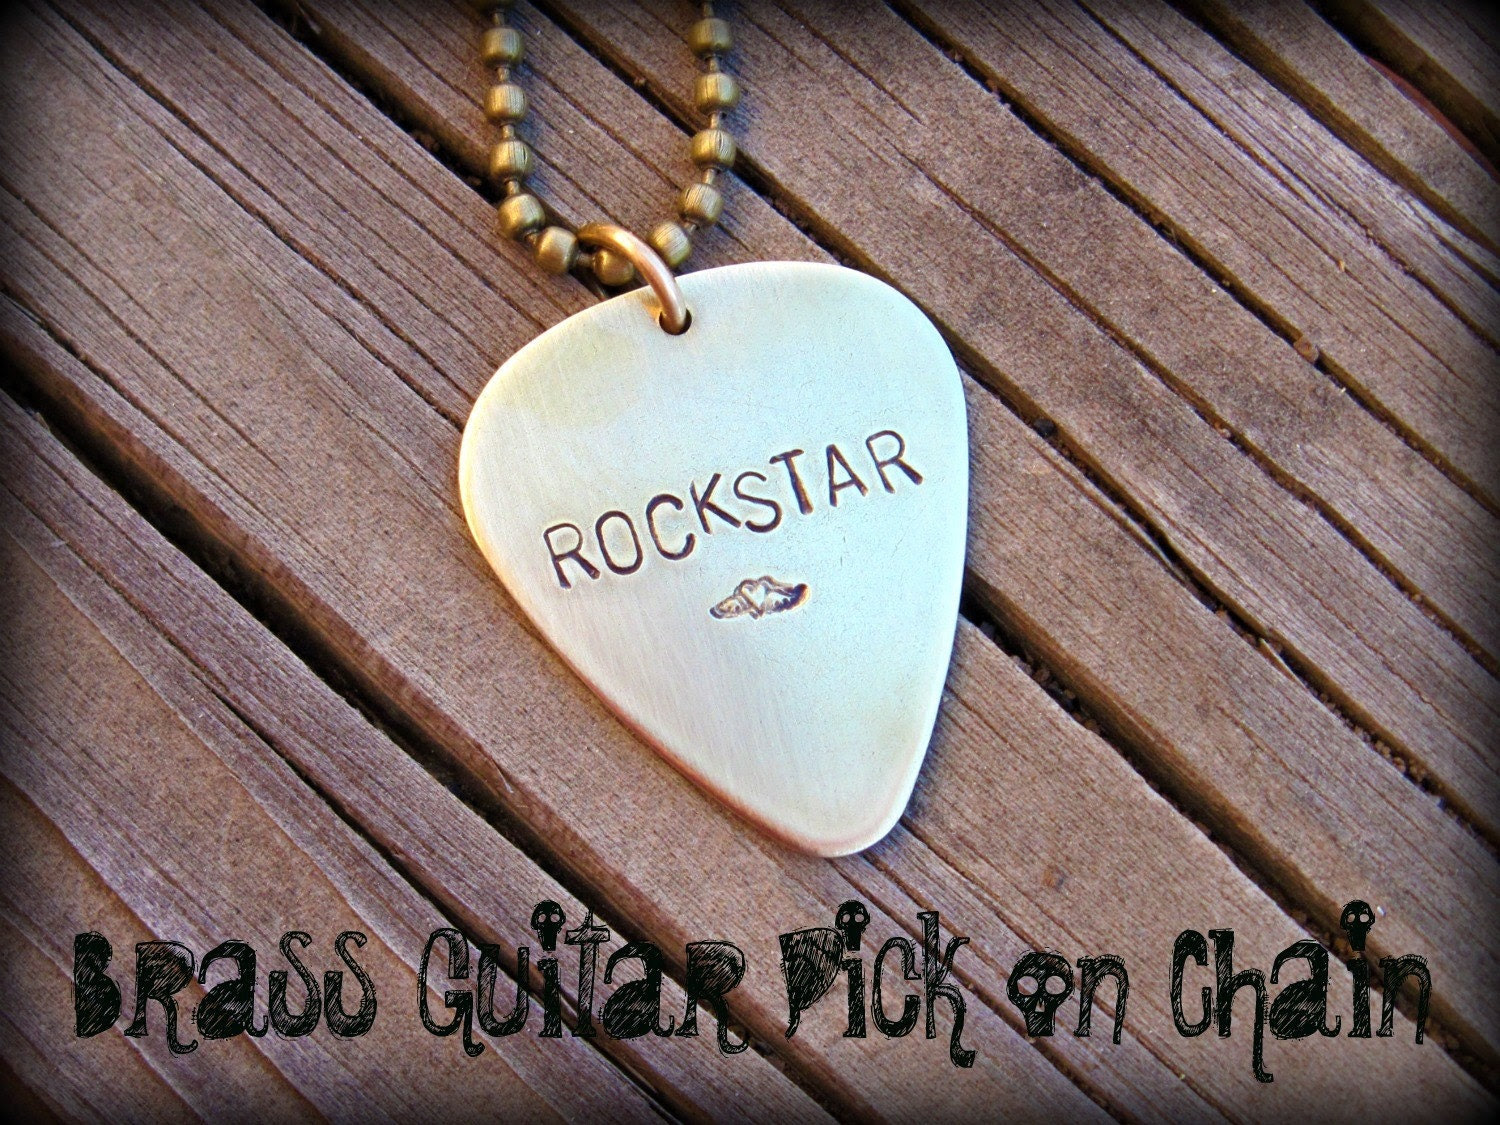 The Isaac - Nickel Silver, Brass or Copper Rocker Guitar Pick (qty 1) - Customize